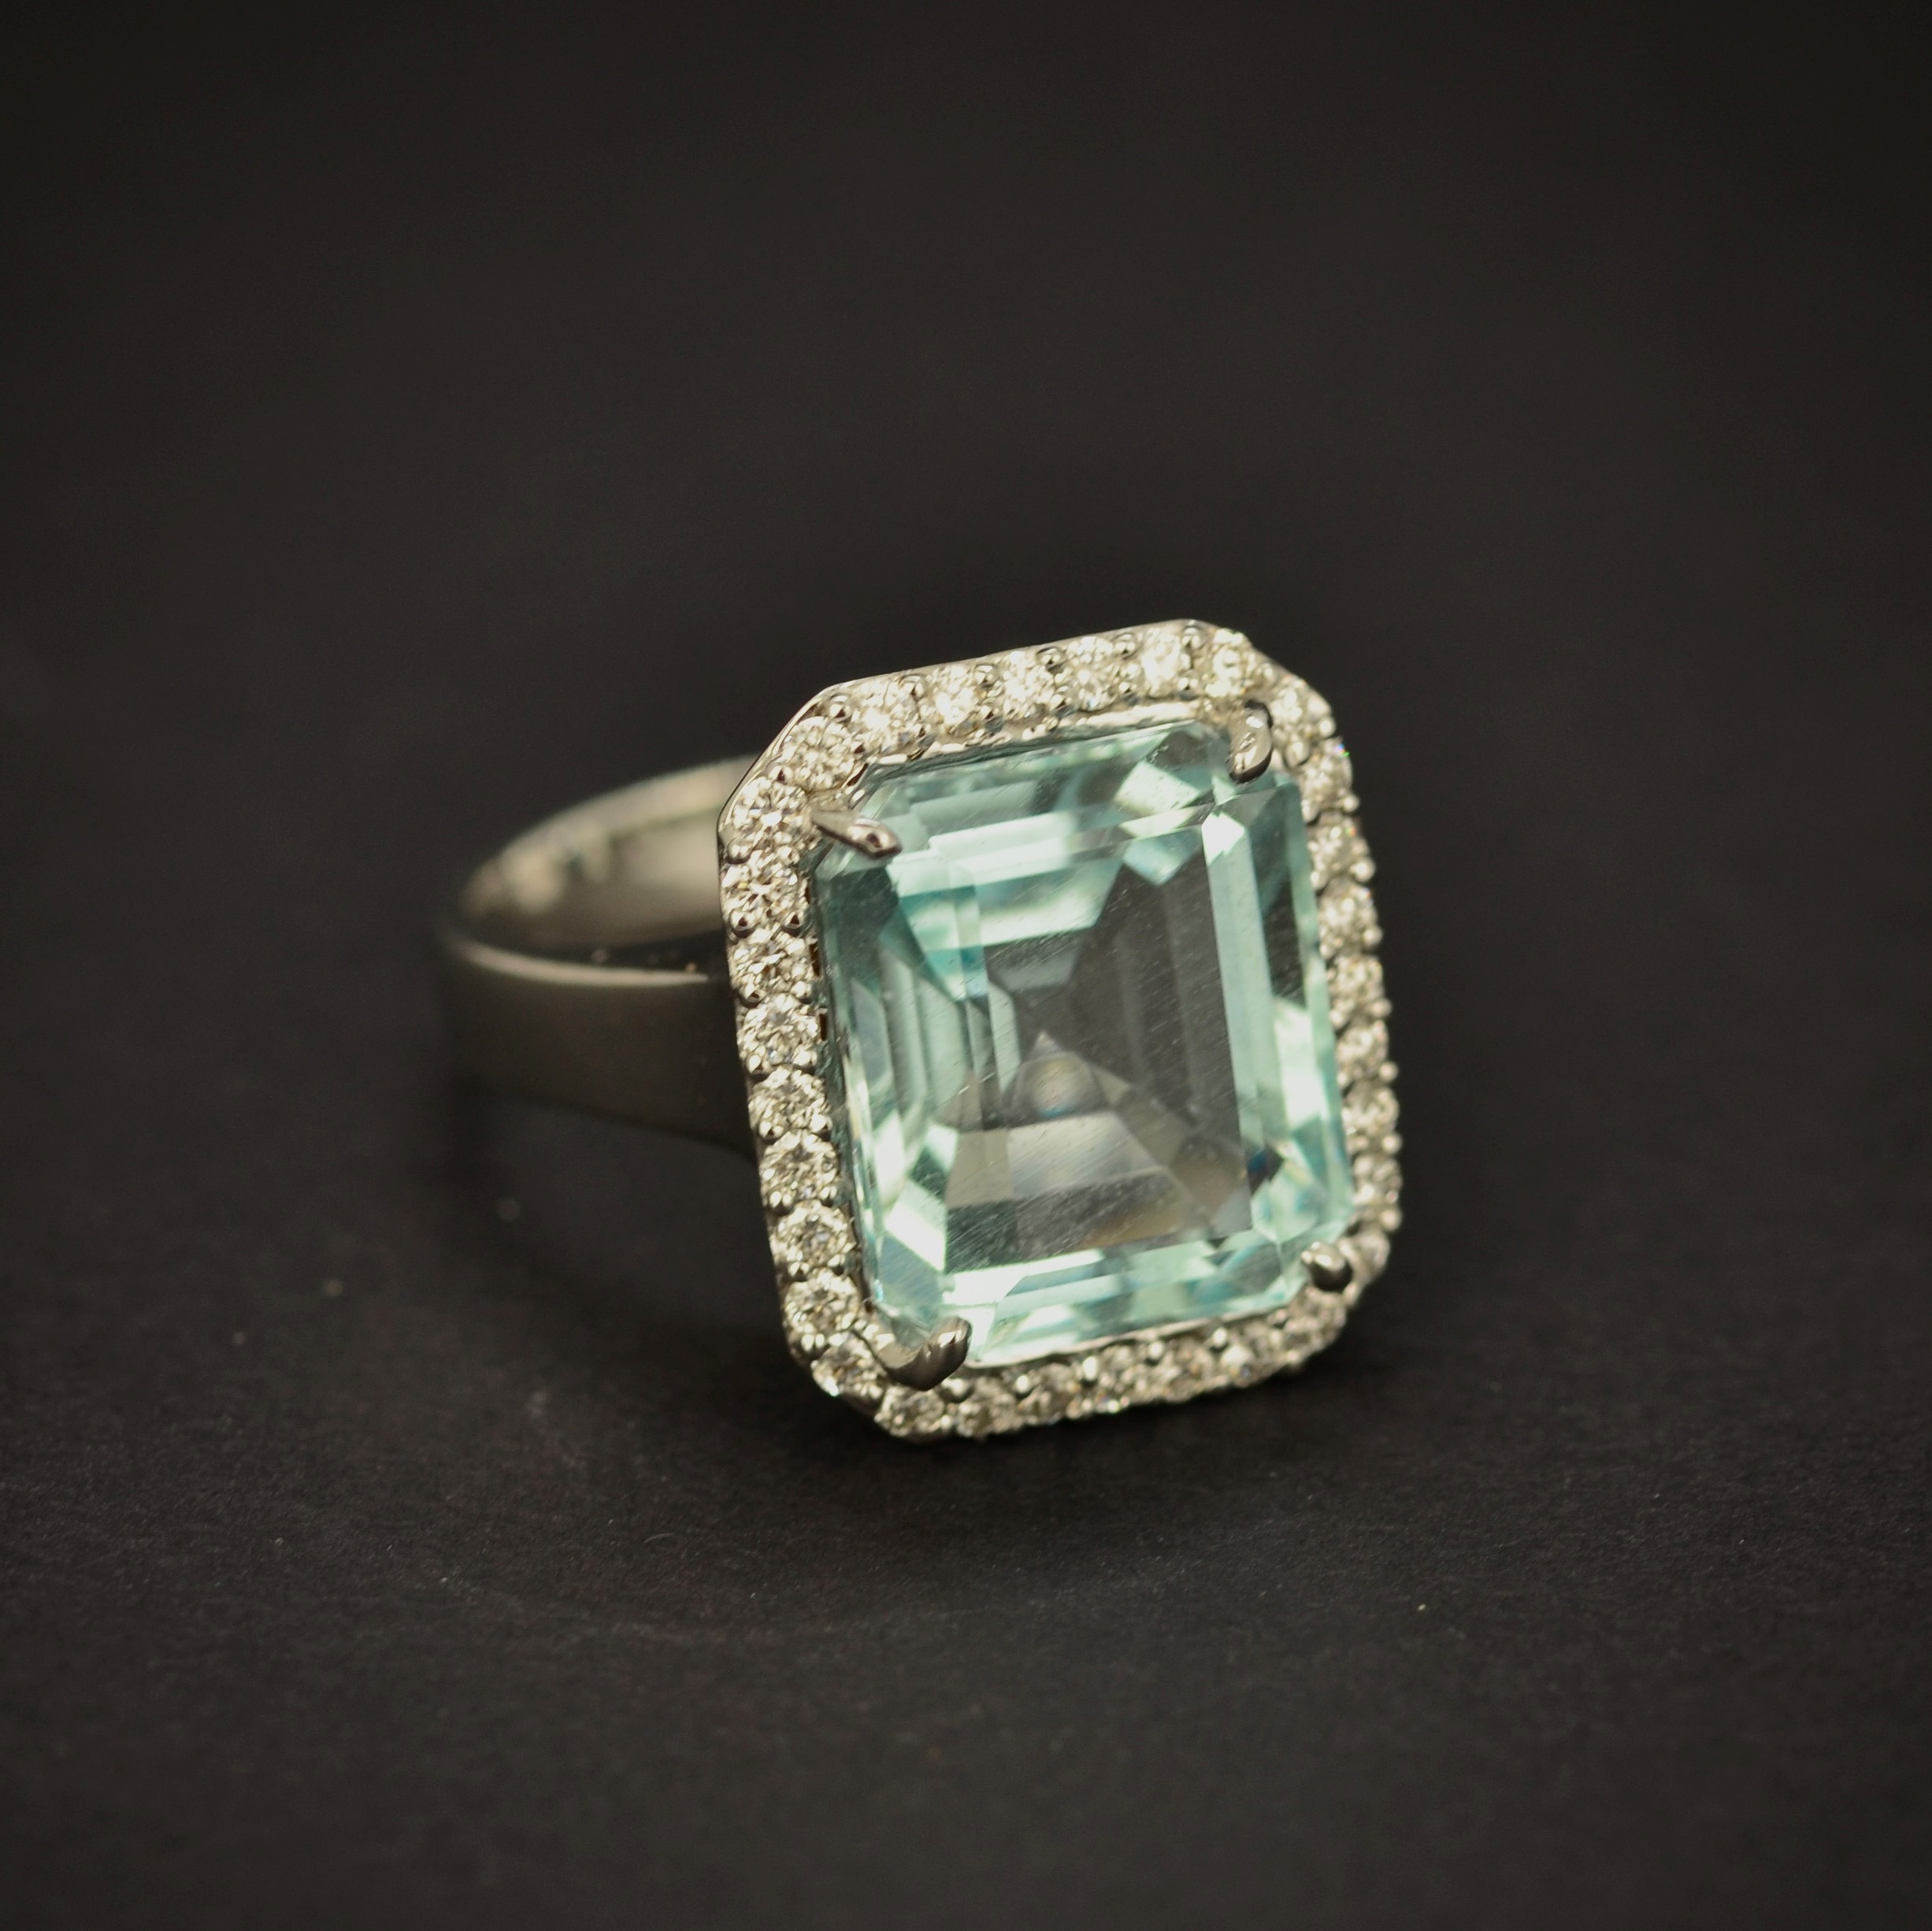 An 18ct white gold ring set with a large emerald cut aquamarine, approx. 8.63ct, 1.5 x 1cm, - Image 4 of 5